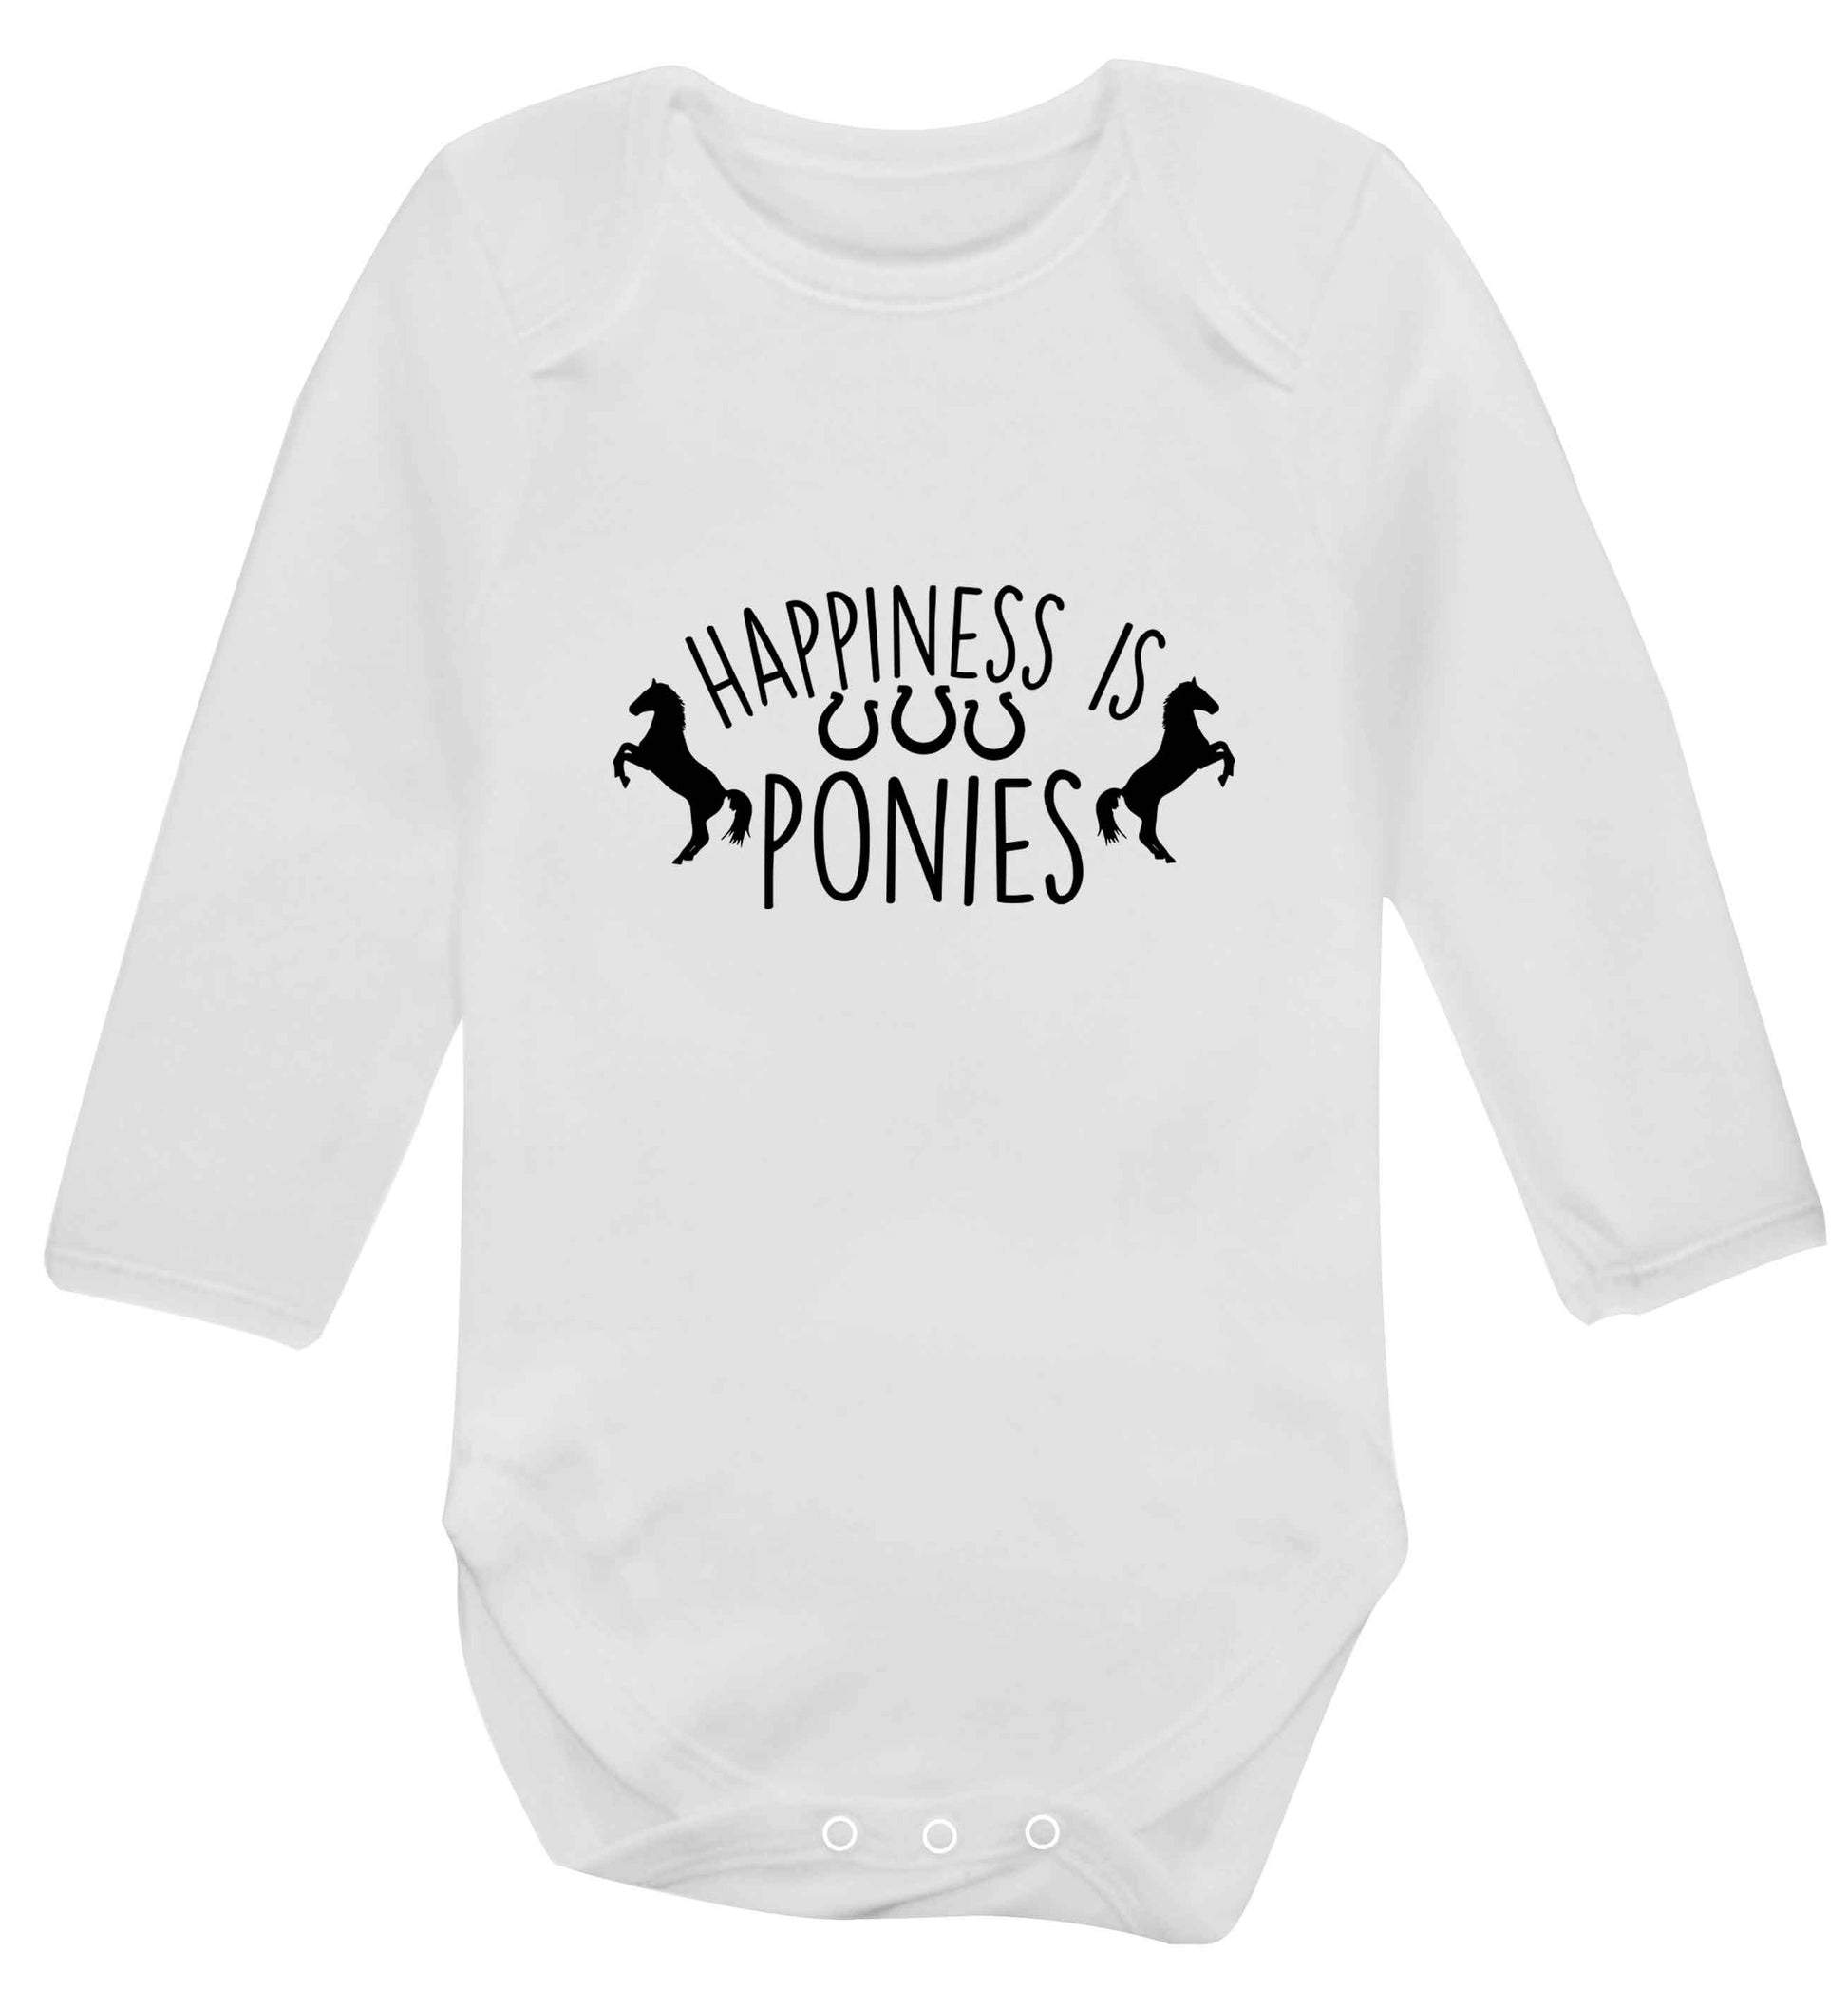 Happiness is ponies baby vest long sleeved white 6-12 months